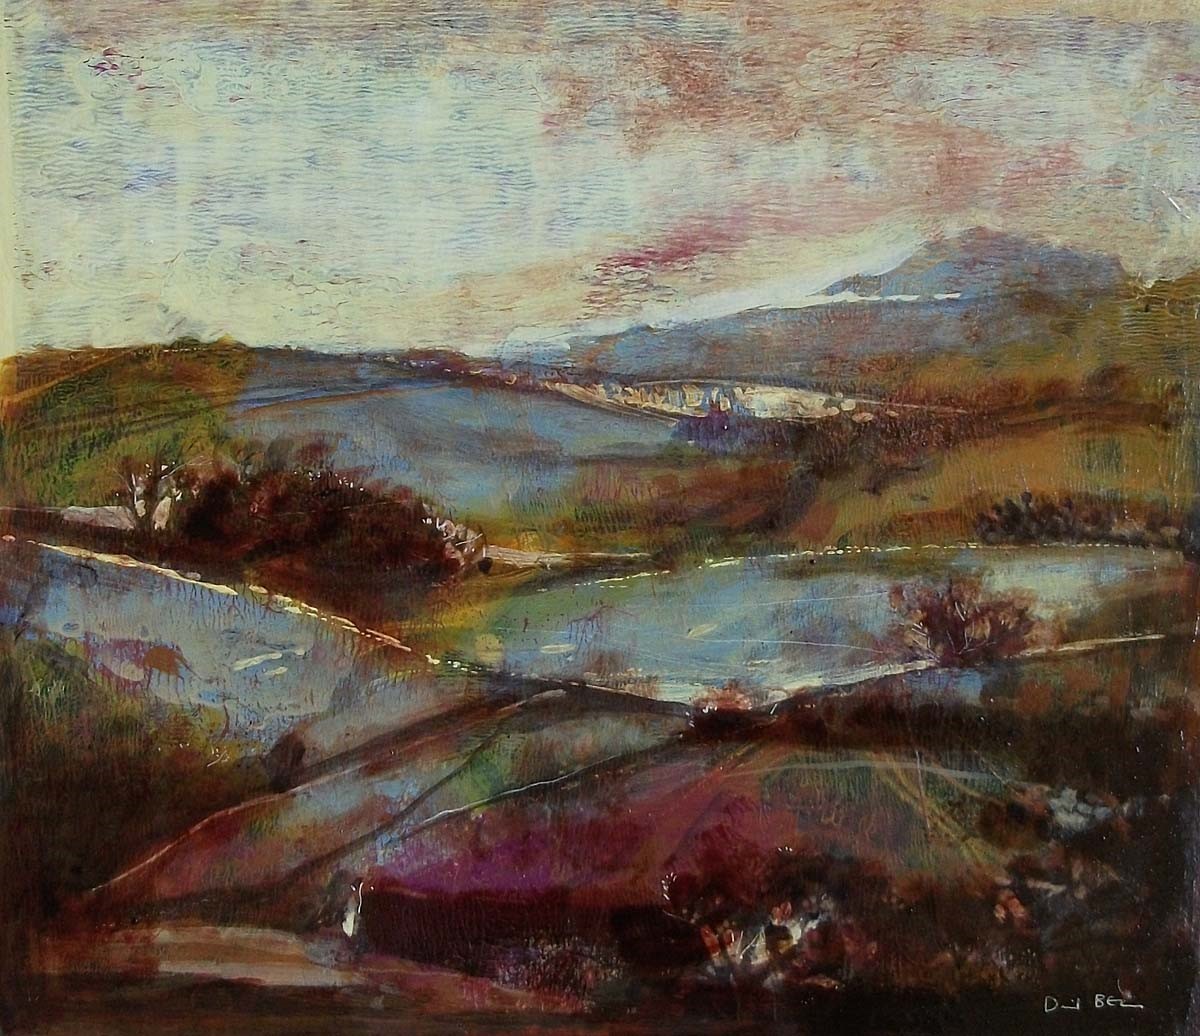 View across the Moors by David Bez, Naive | Landscape | Northern | Local